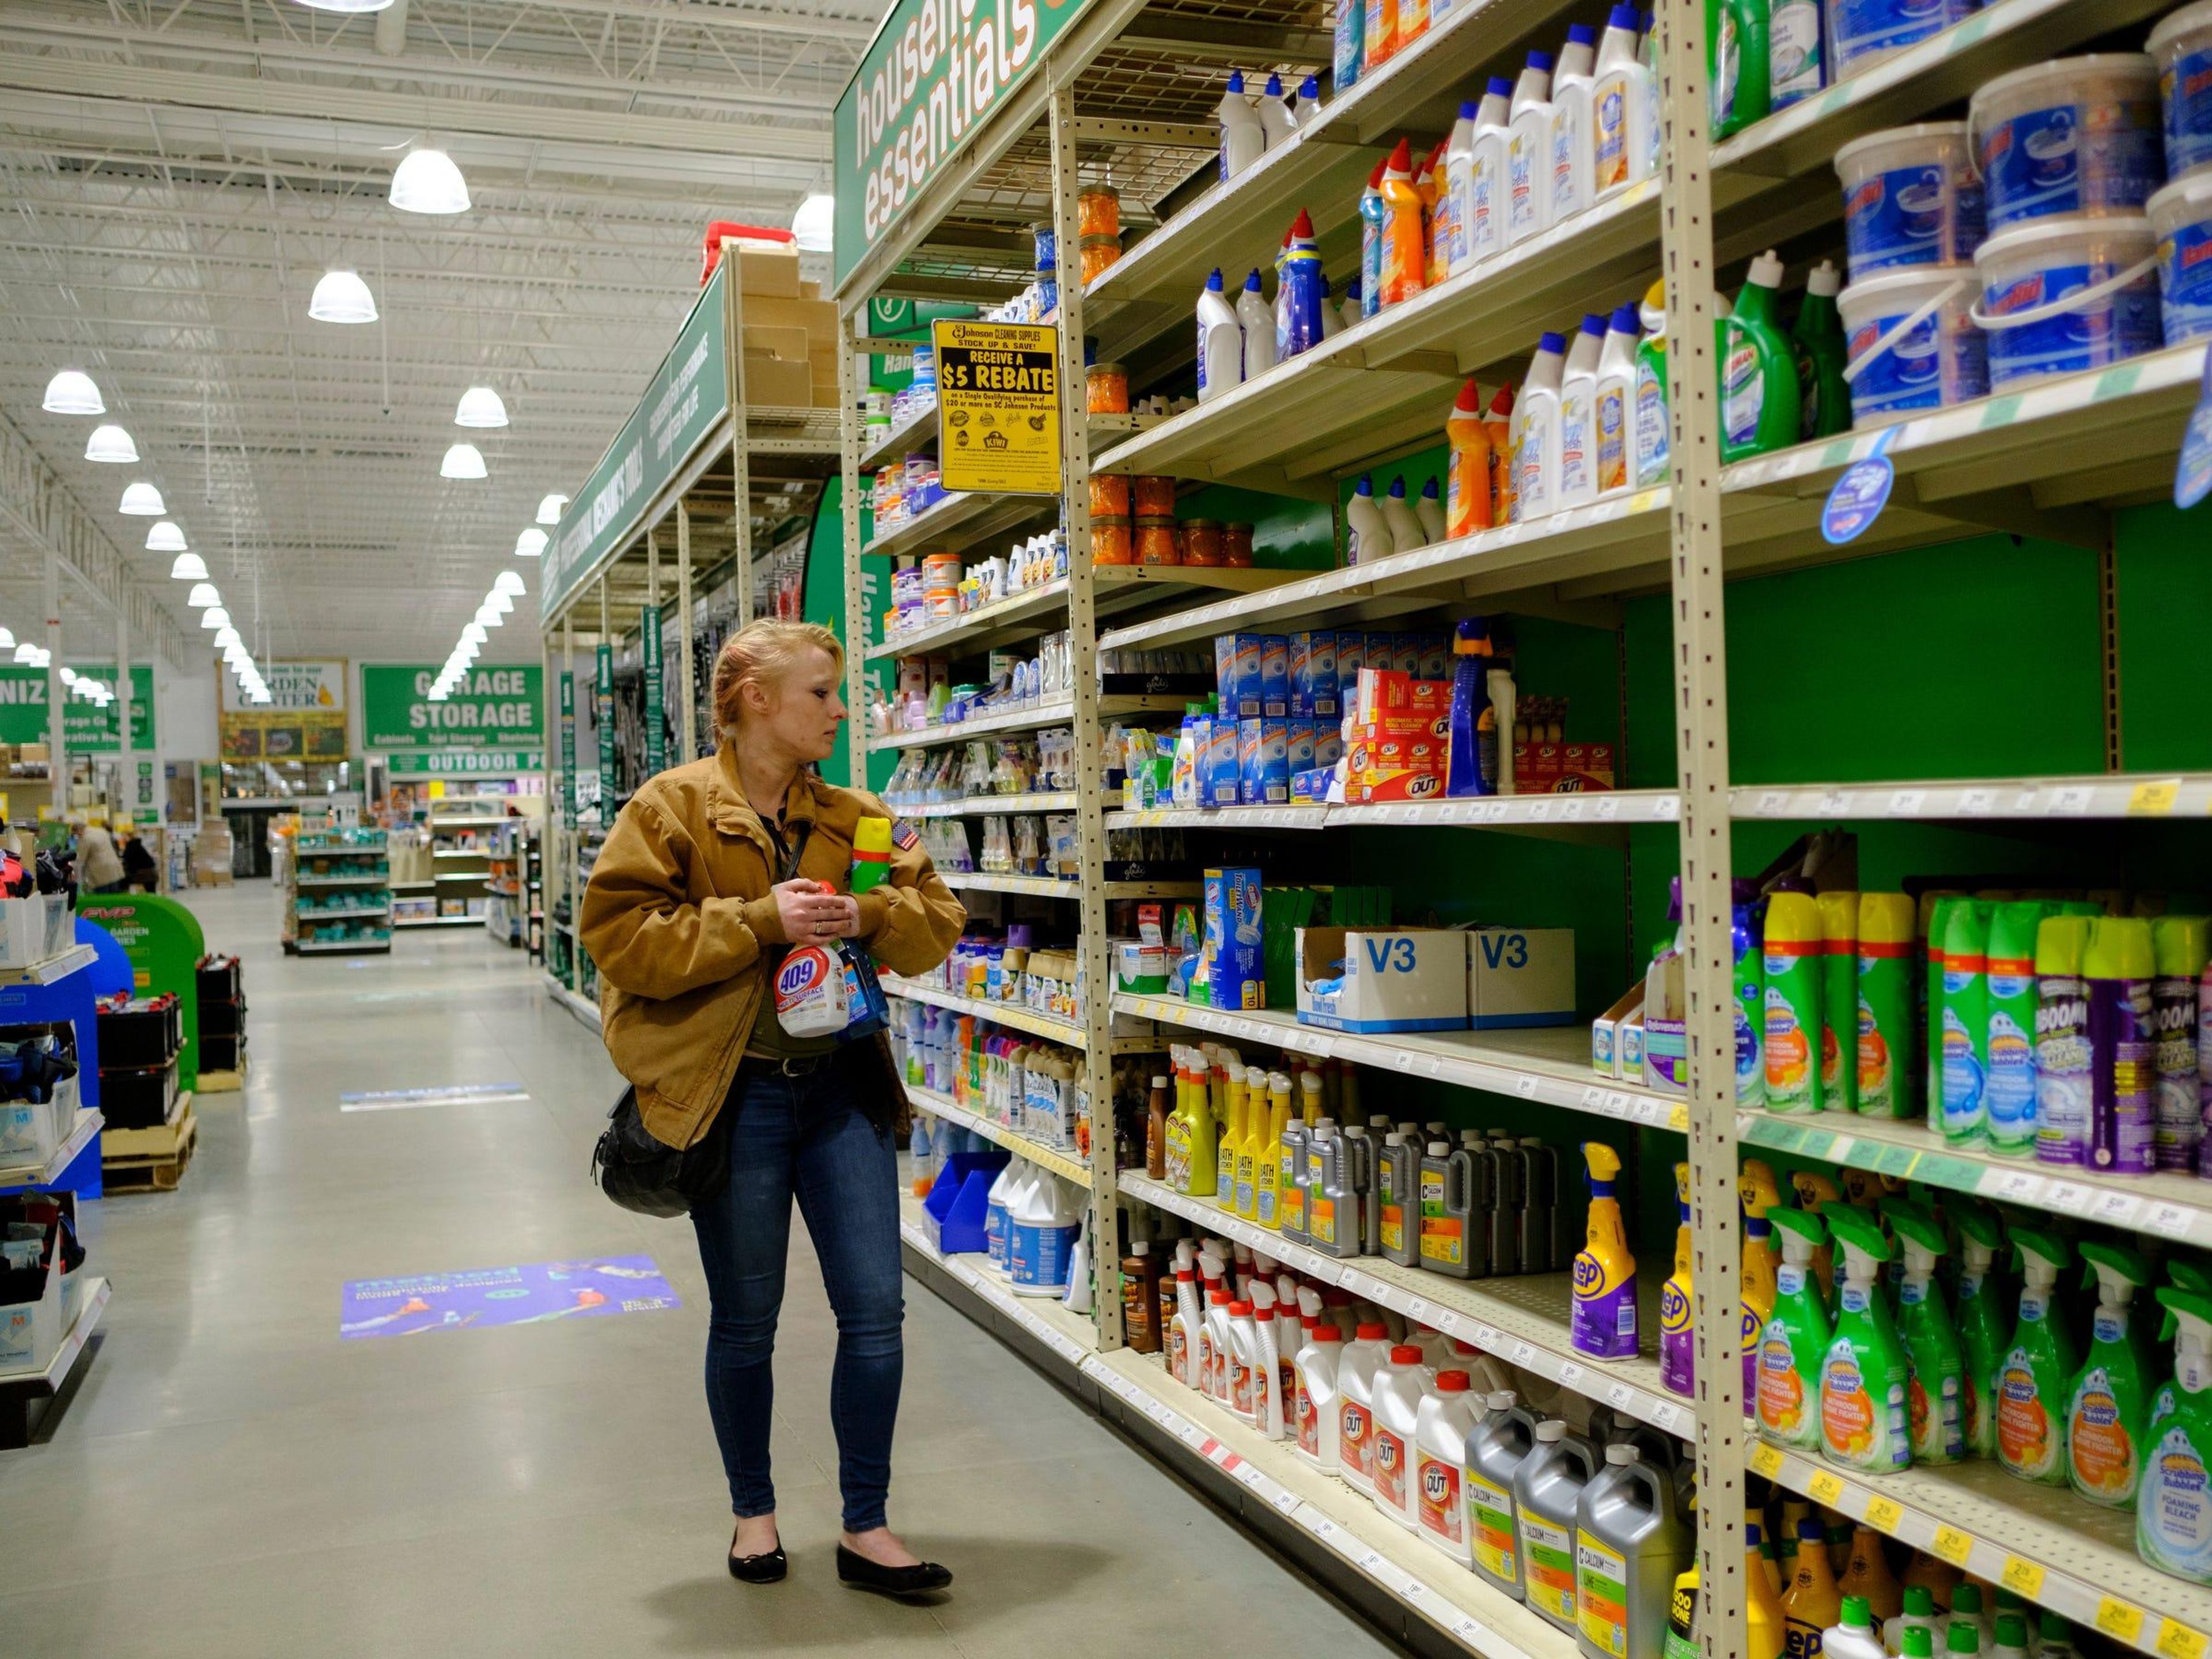 Experts say cleaning surfaces excessively could be overkill for COVID-19, despite a $30 million increase in cleaning product sales